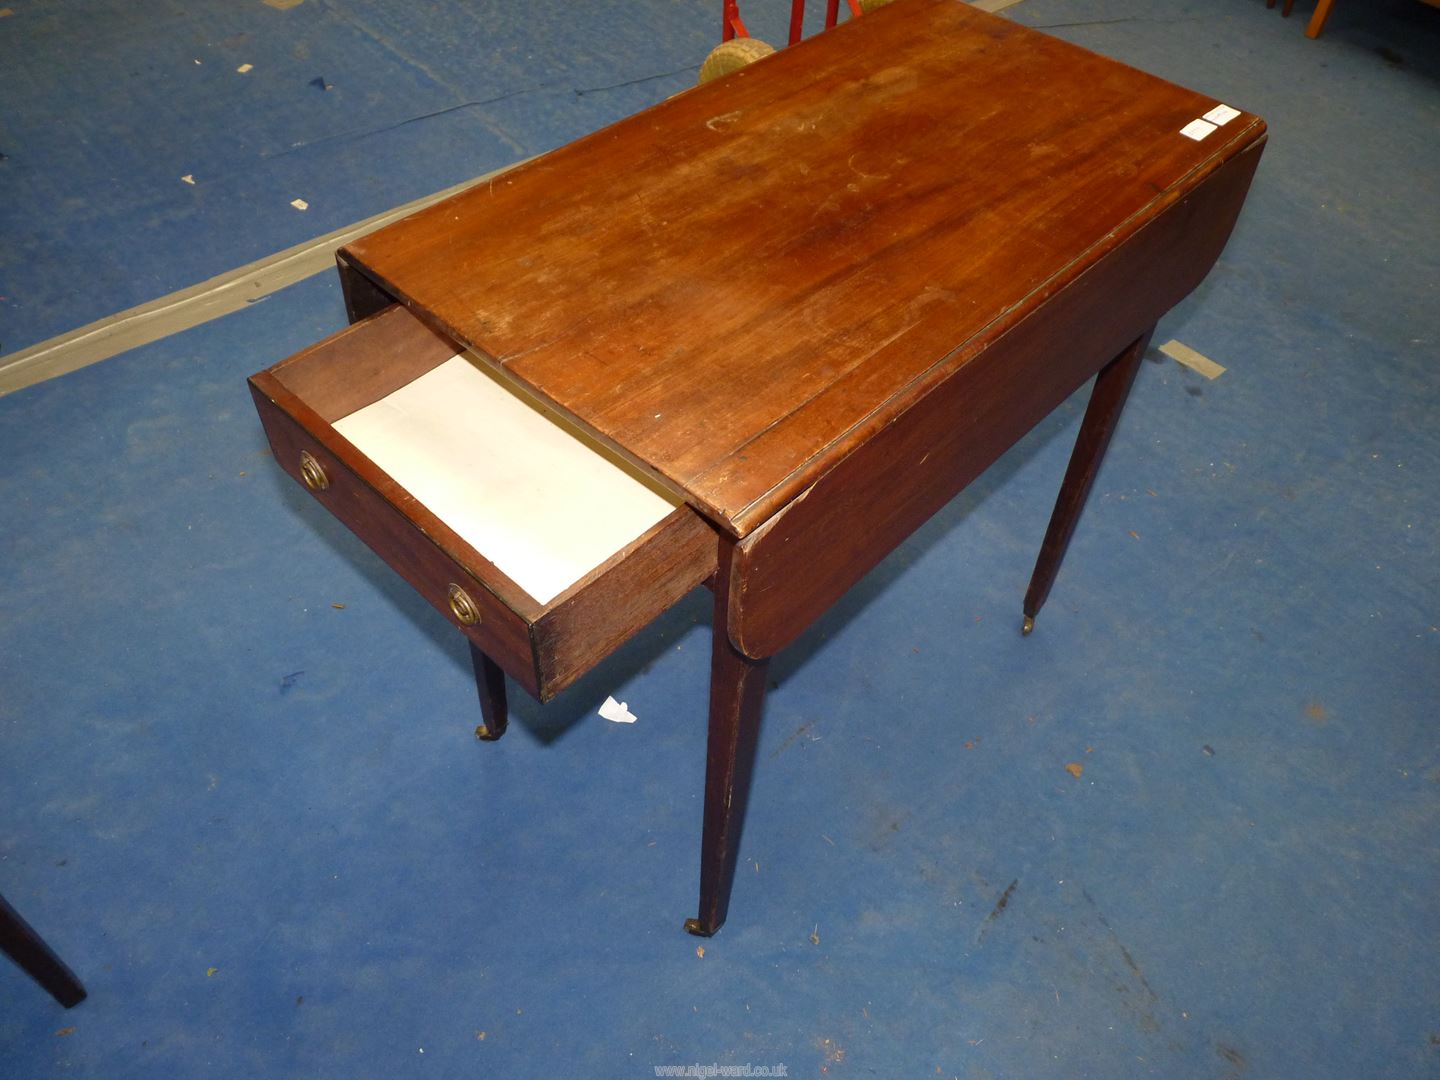 A Mahogany Pembroke table, standing on tapering square legs with brass castors, with drawer, - Image 3 of 3